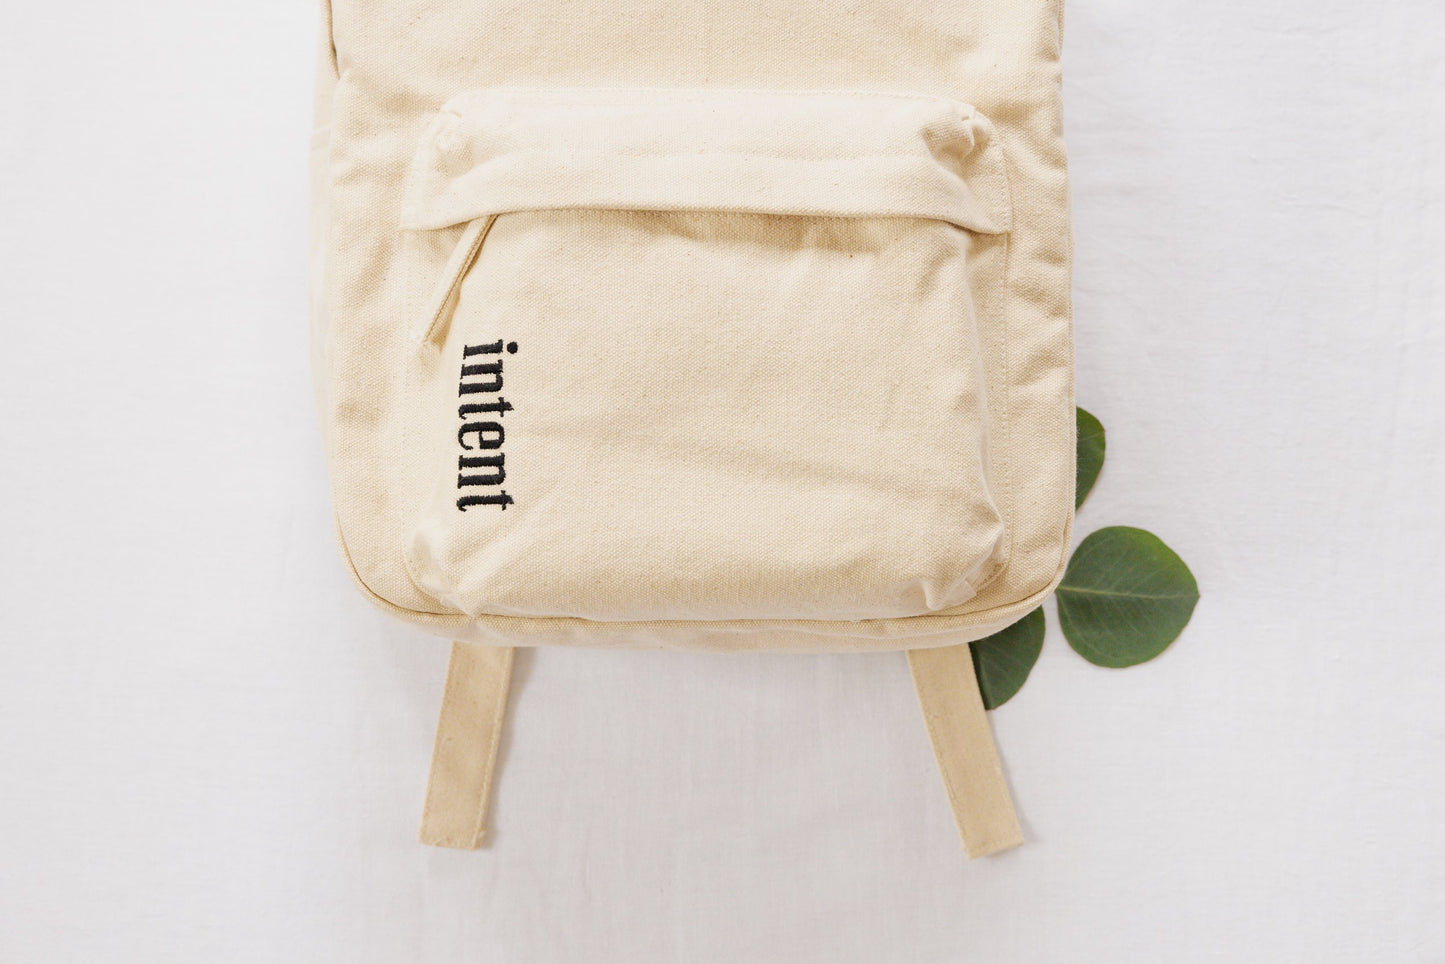 organic cotton and fair trade certified canvas backpack. minimalistic design 